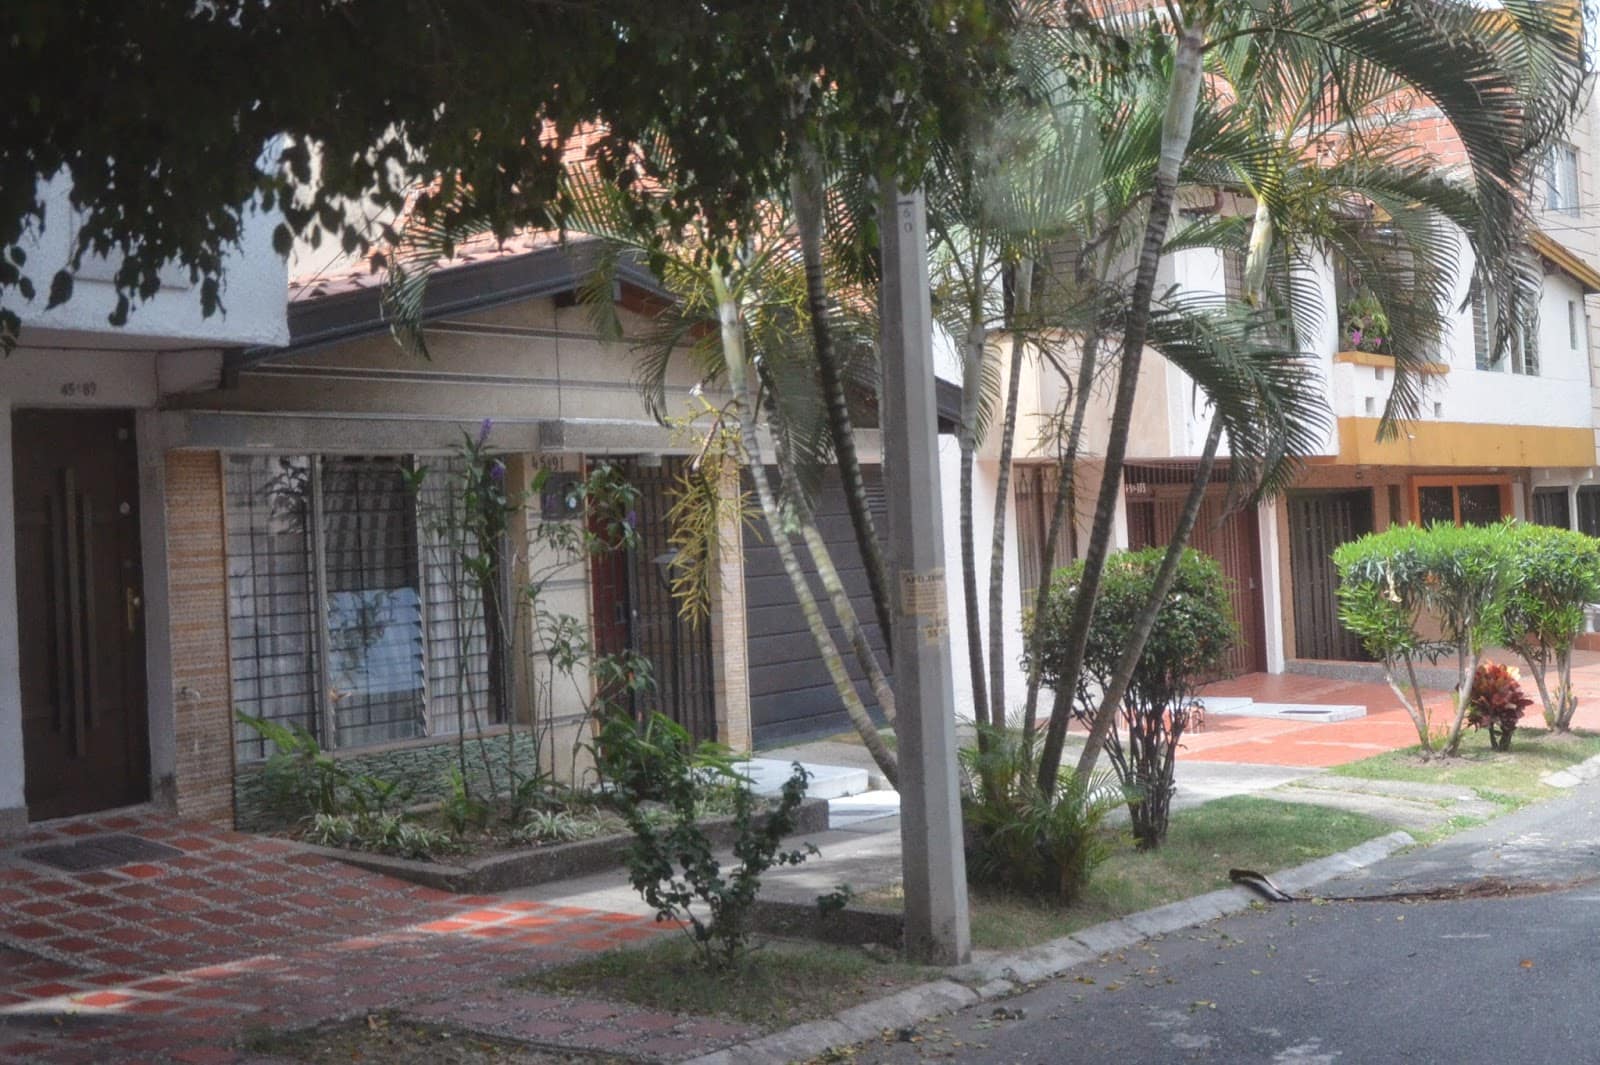 The house next door where Escobar fell on the Pablo Escobar tour in Medellín, Colombia